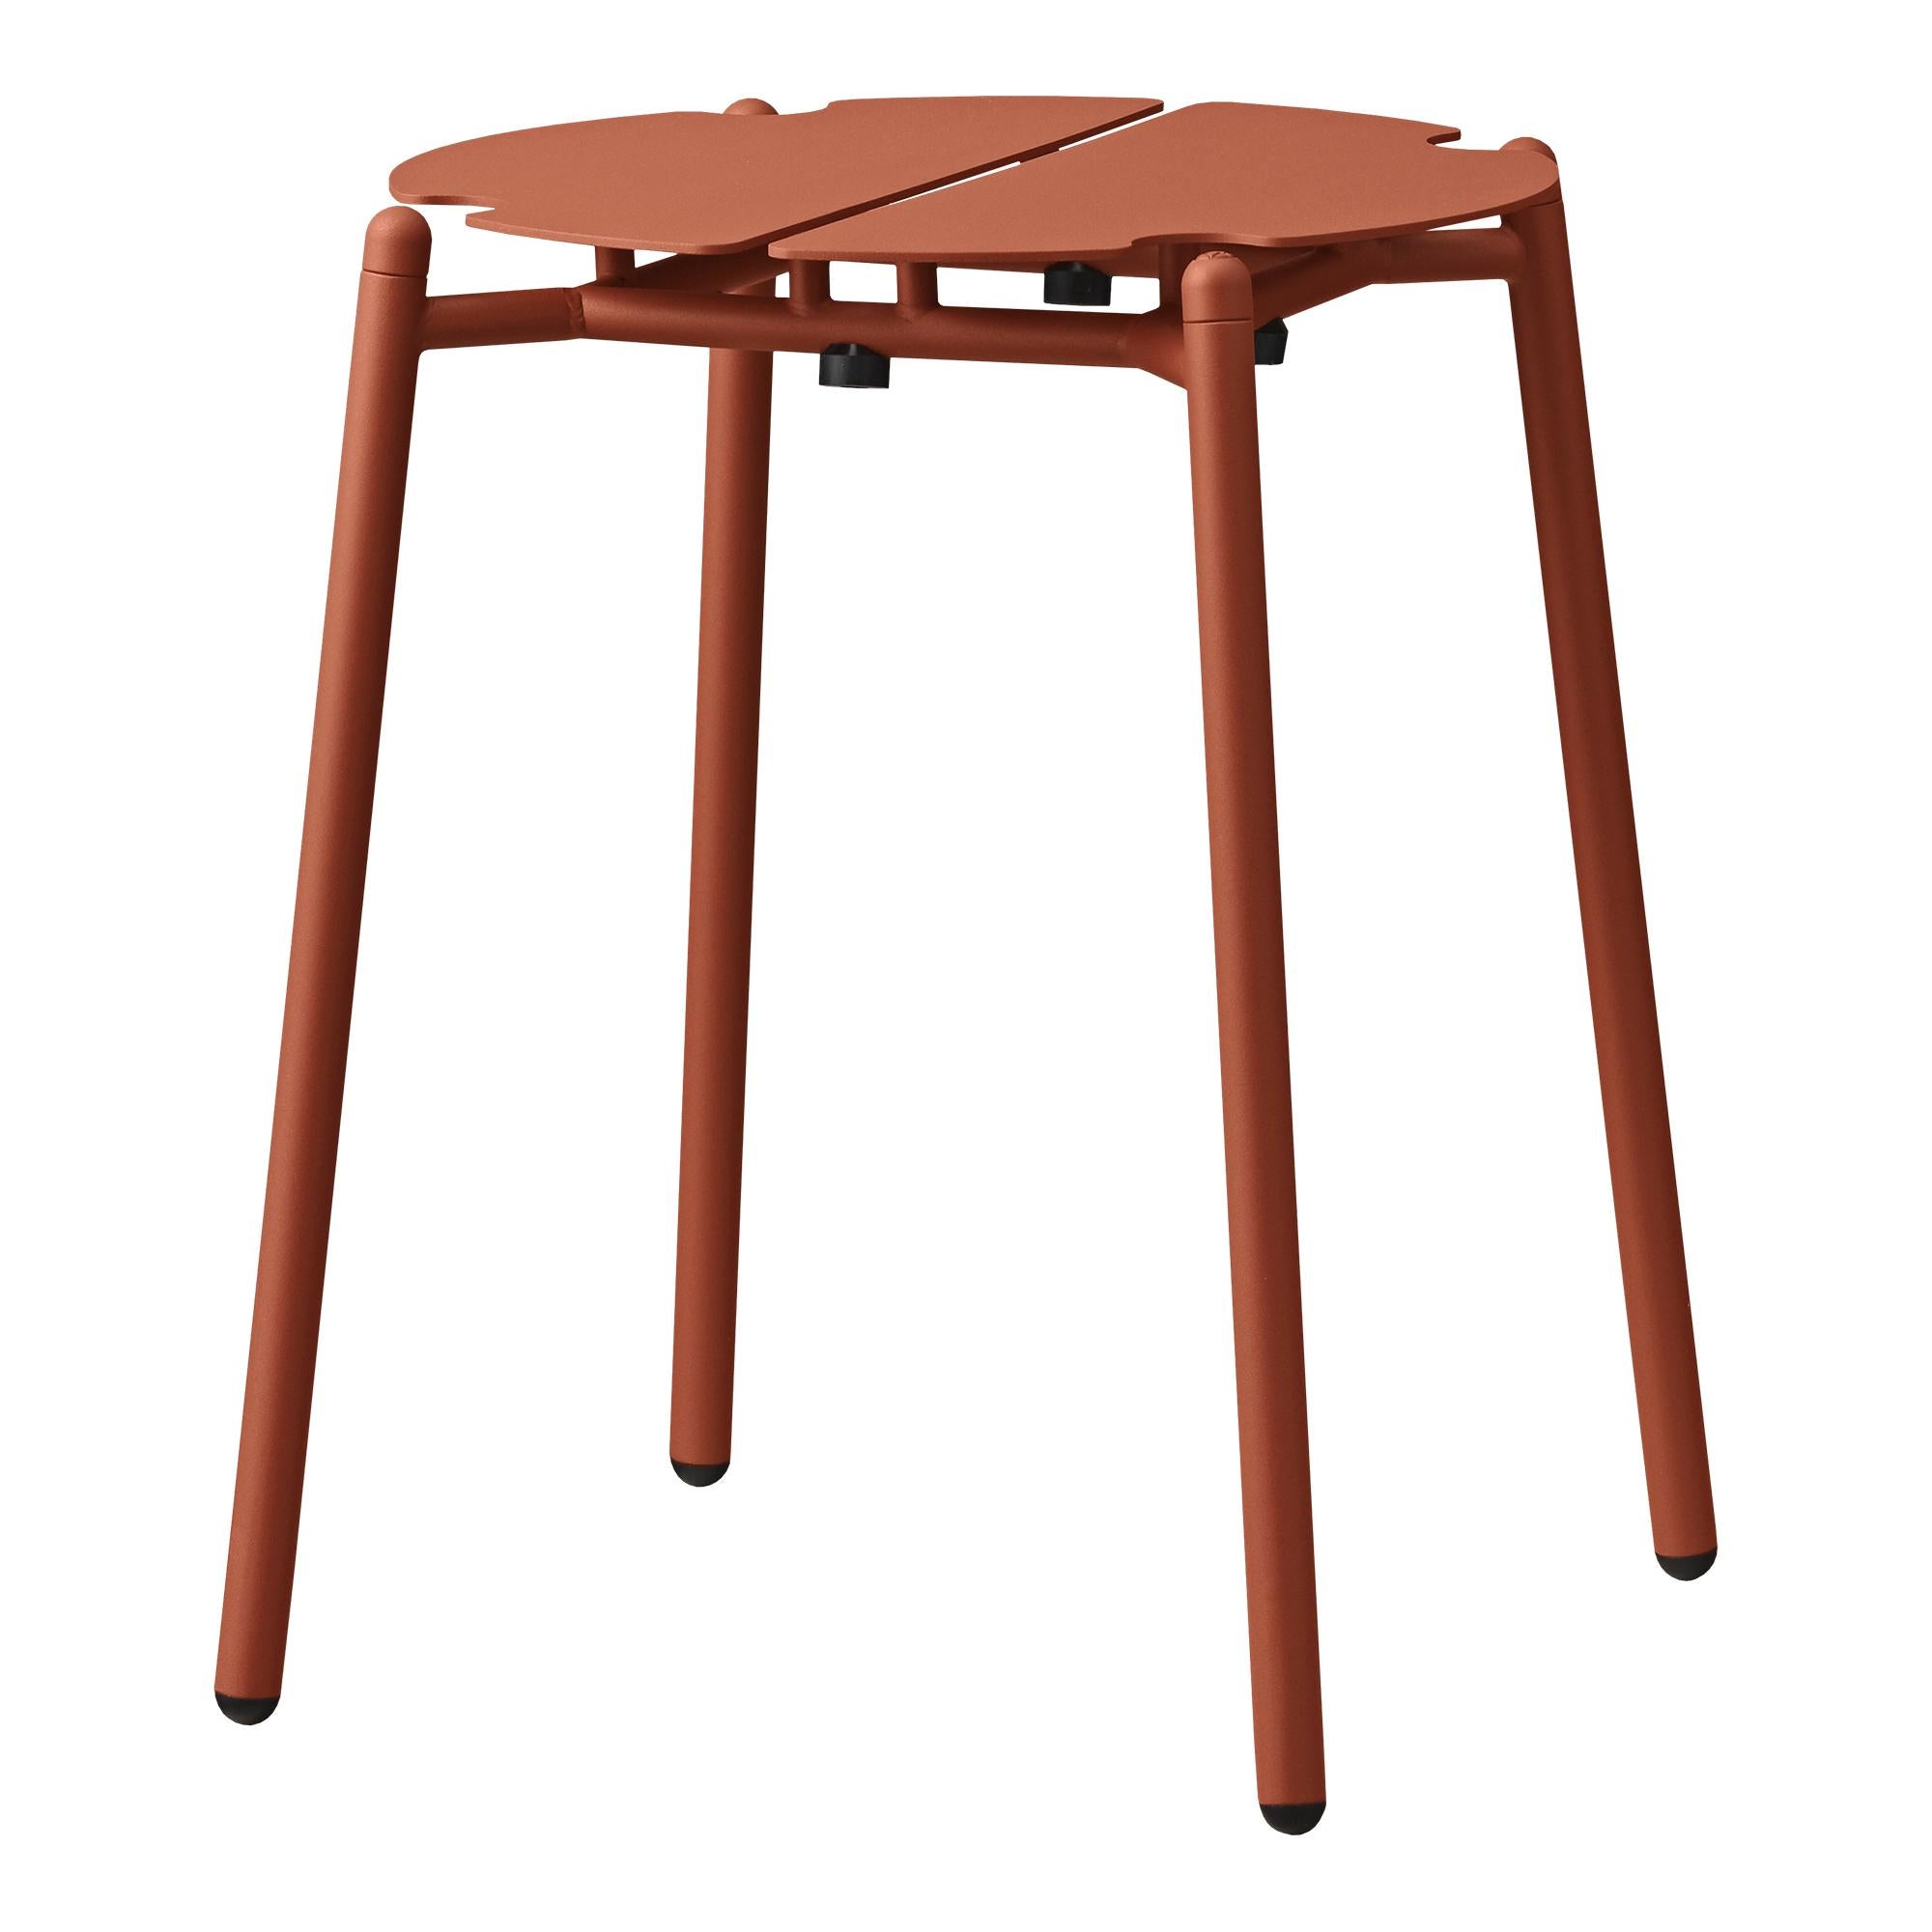 Ginger bread minimalist stool
Dimensions: Diameter 35 x heighr 45 cm 
Materials: Steel w. Matte powder coating & aluminum w. Matte powder coating.
Available in colors: Taupe, bordeaux, forest, ginger bread, black and, black and gold. 


The NOVO